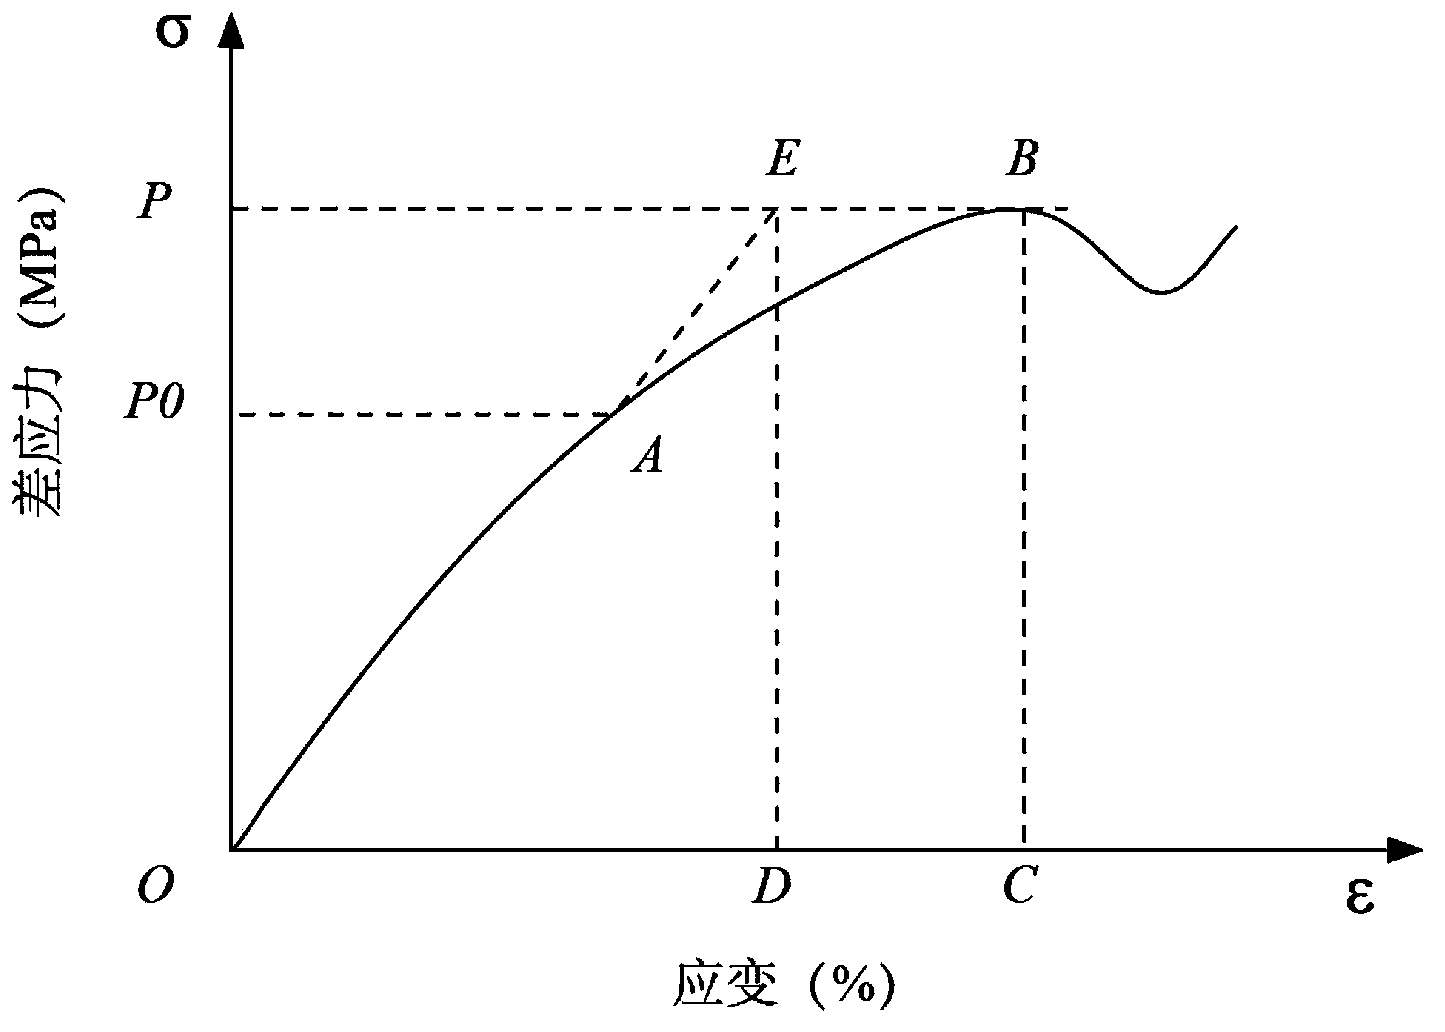 Method for restoring brittleness and plasticity evolution history of petroleum and natural gas cap rocks